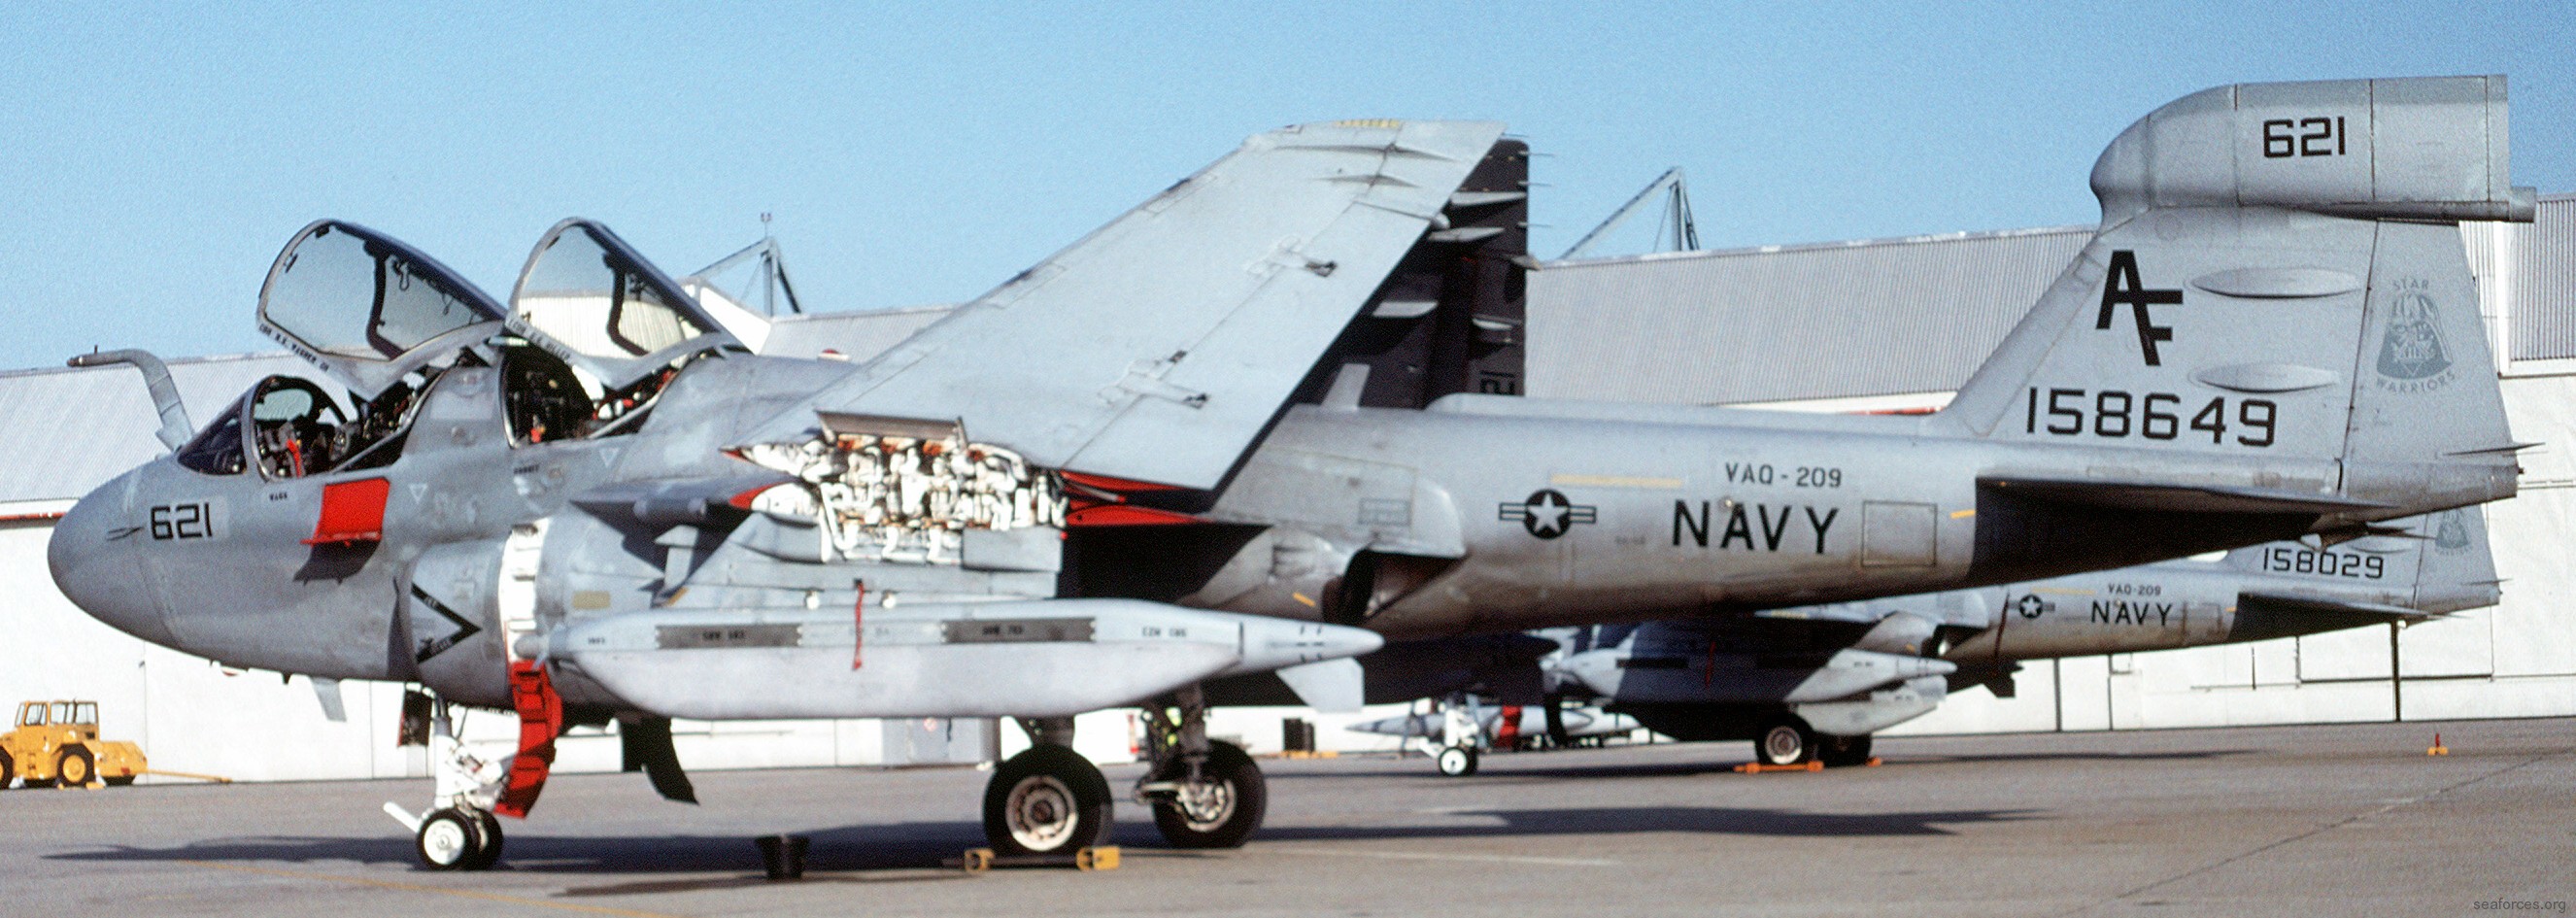 vaq-209 star warriors electronic attack squadron navy ea-6b prowler 44